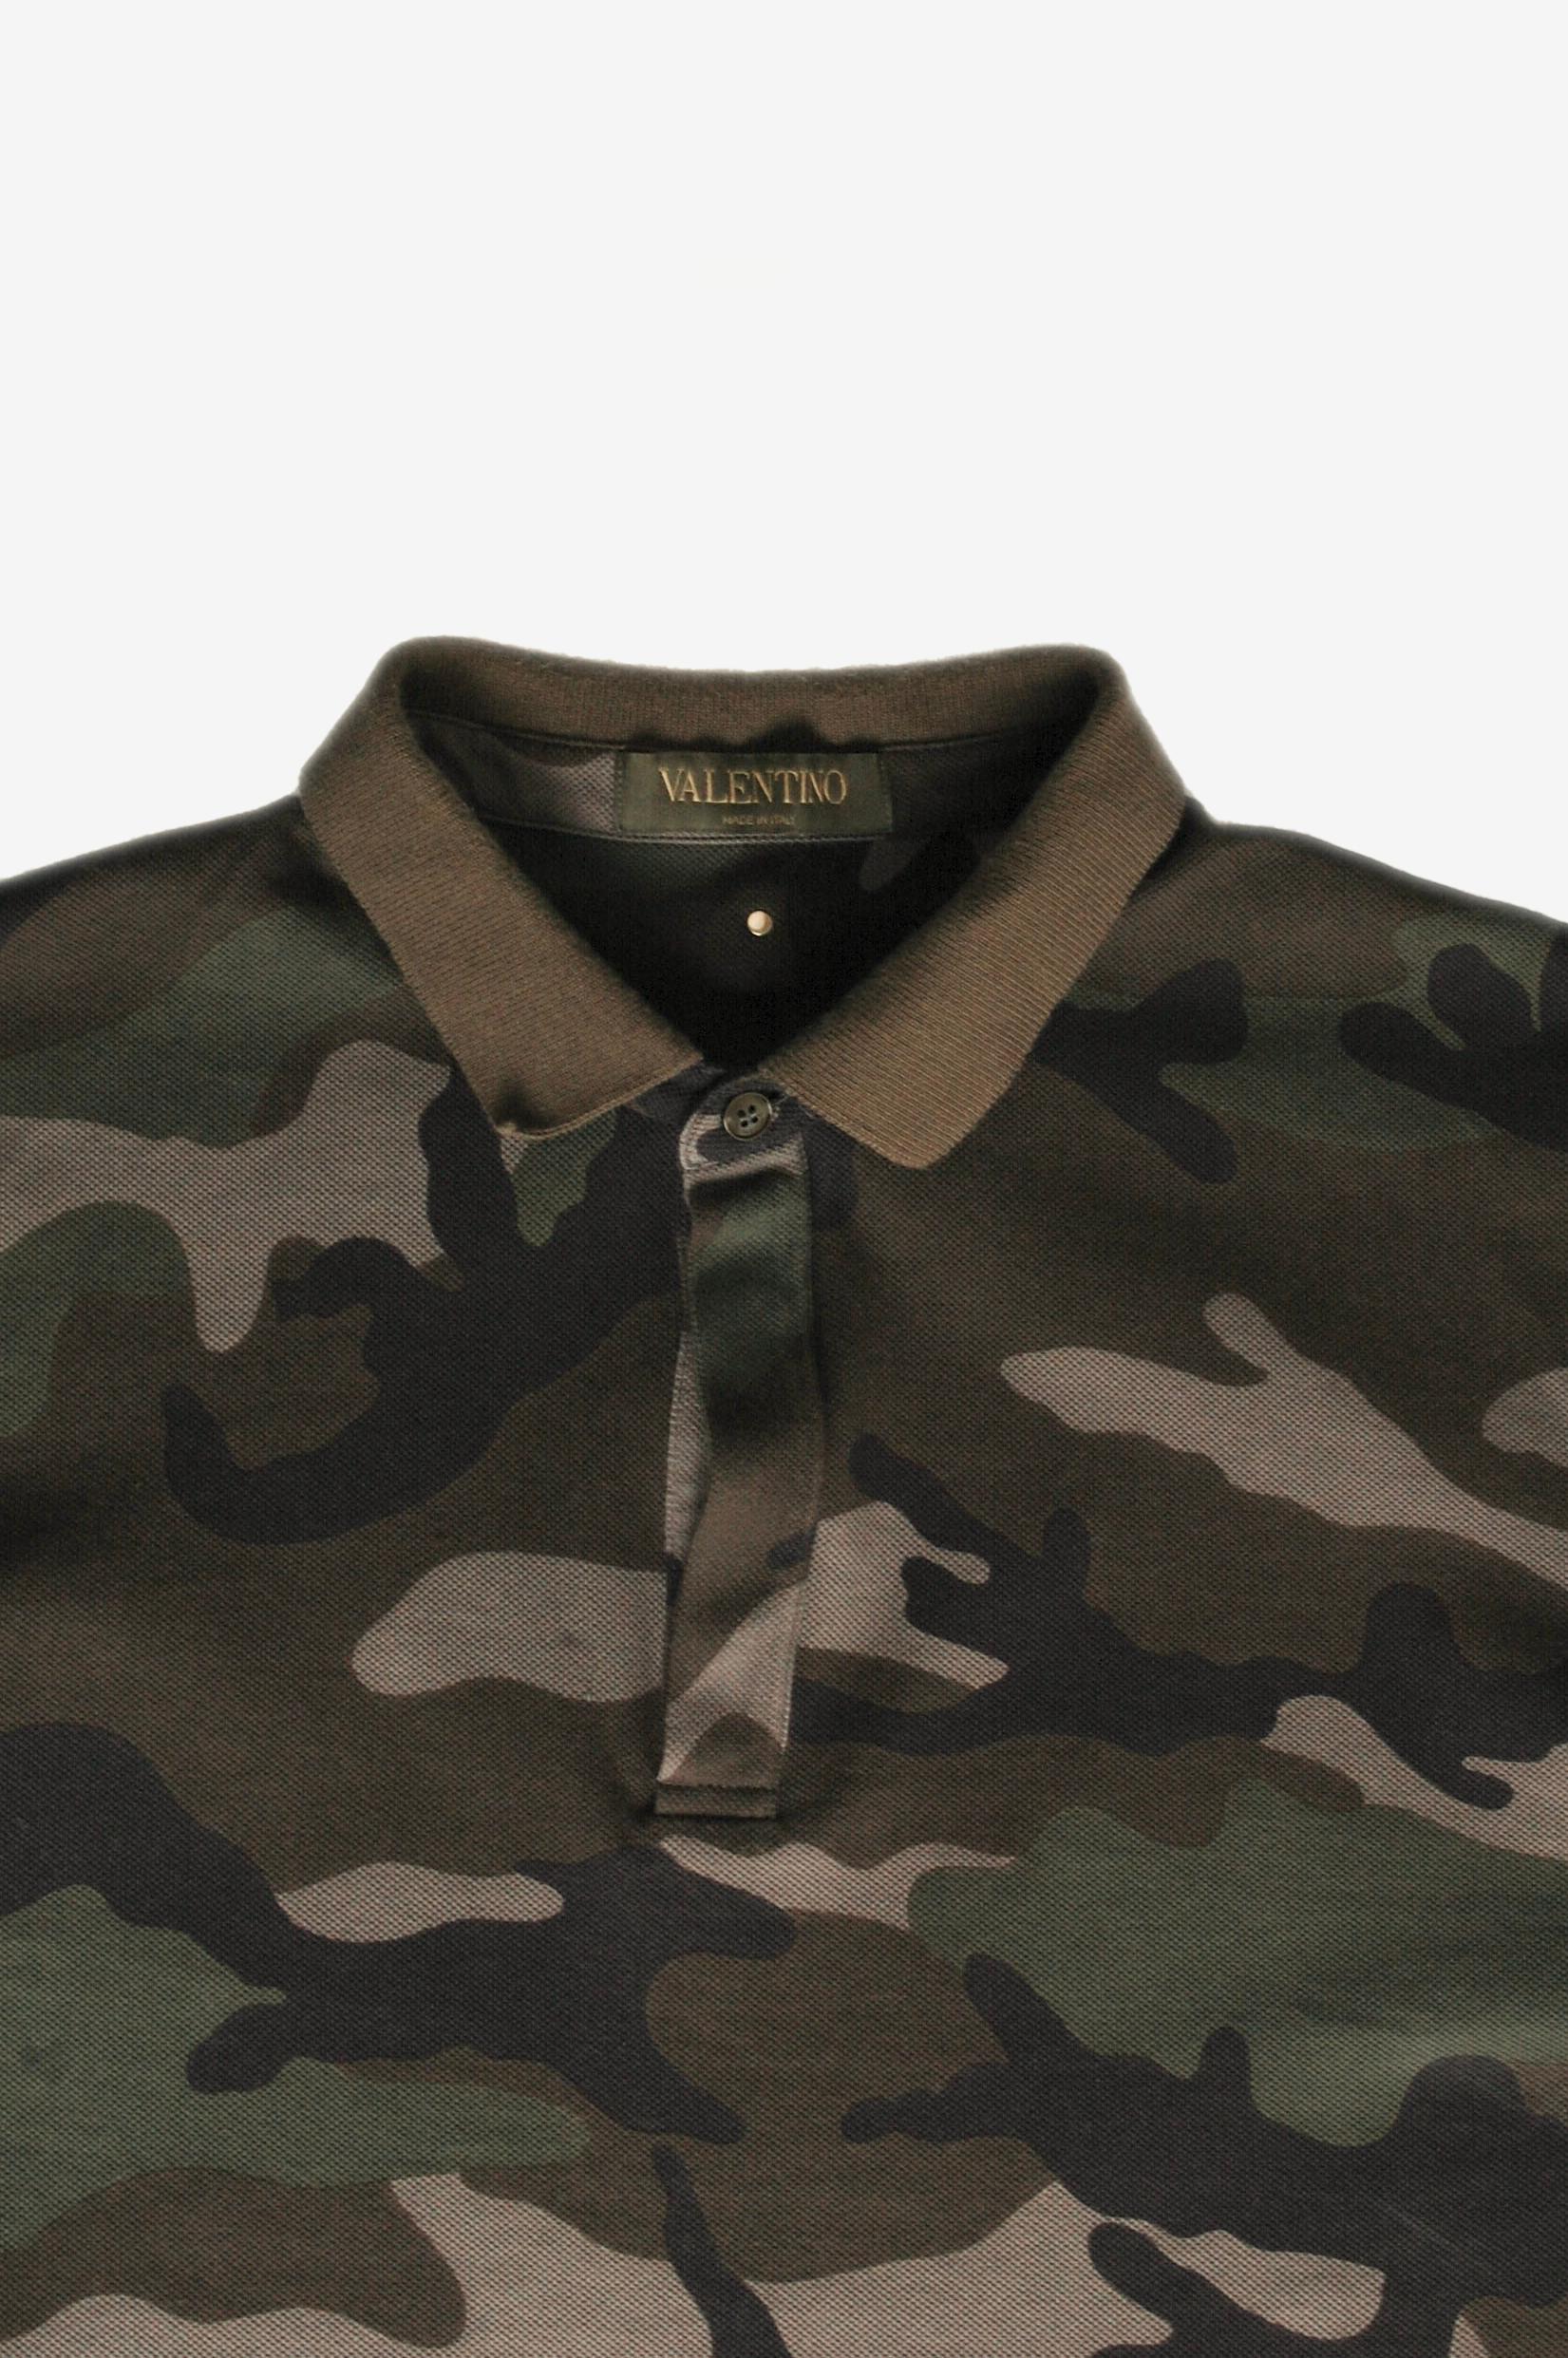 Item for sale is 100% genuine Valentino Camo Men Polo
Color: Khaki
(An actual color may a bit vary due to individual computer screen interpretation)
Material: 100% cotton
Tag size: M runs S/M
This t shirt is great quality item. Rate 9 of 10,